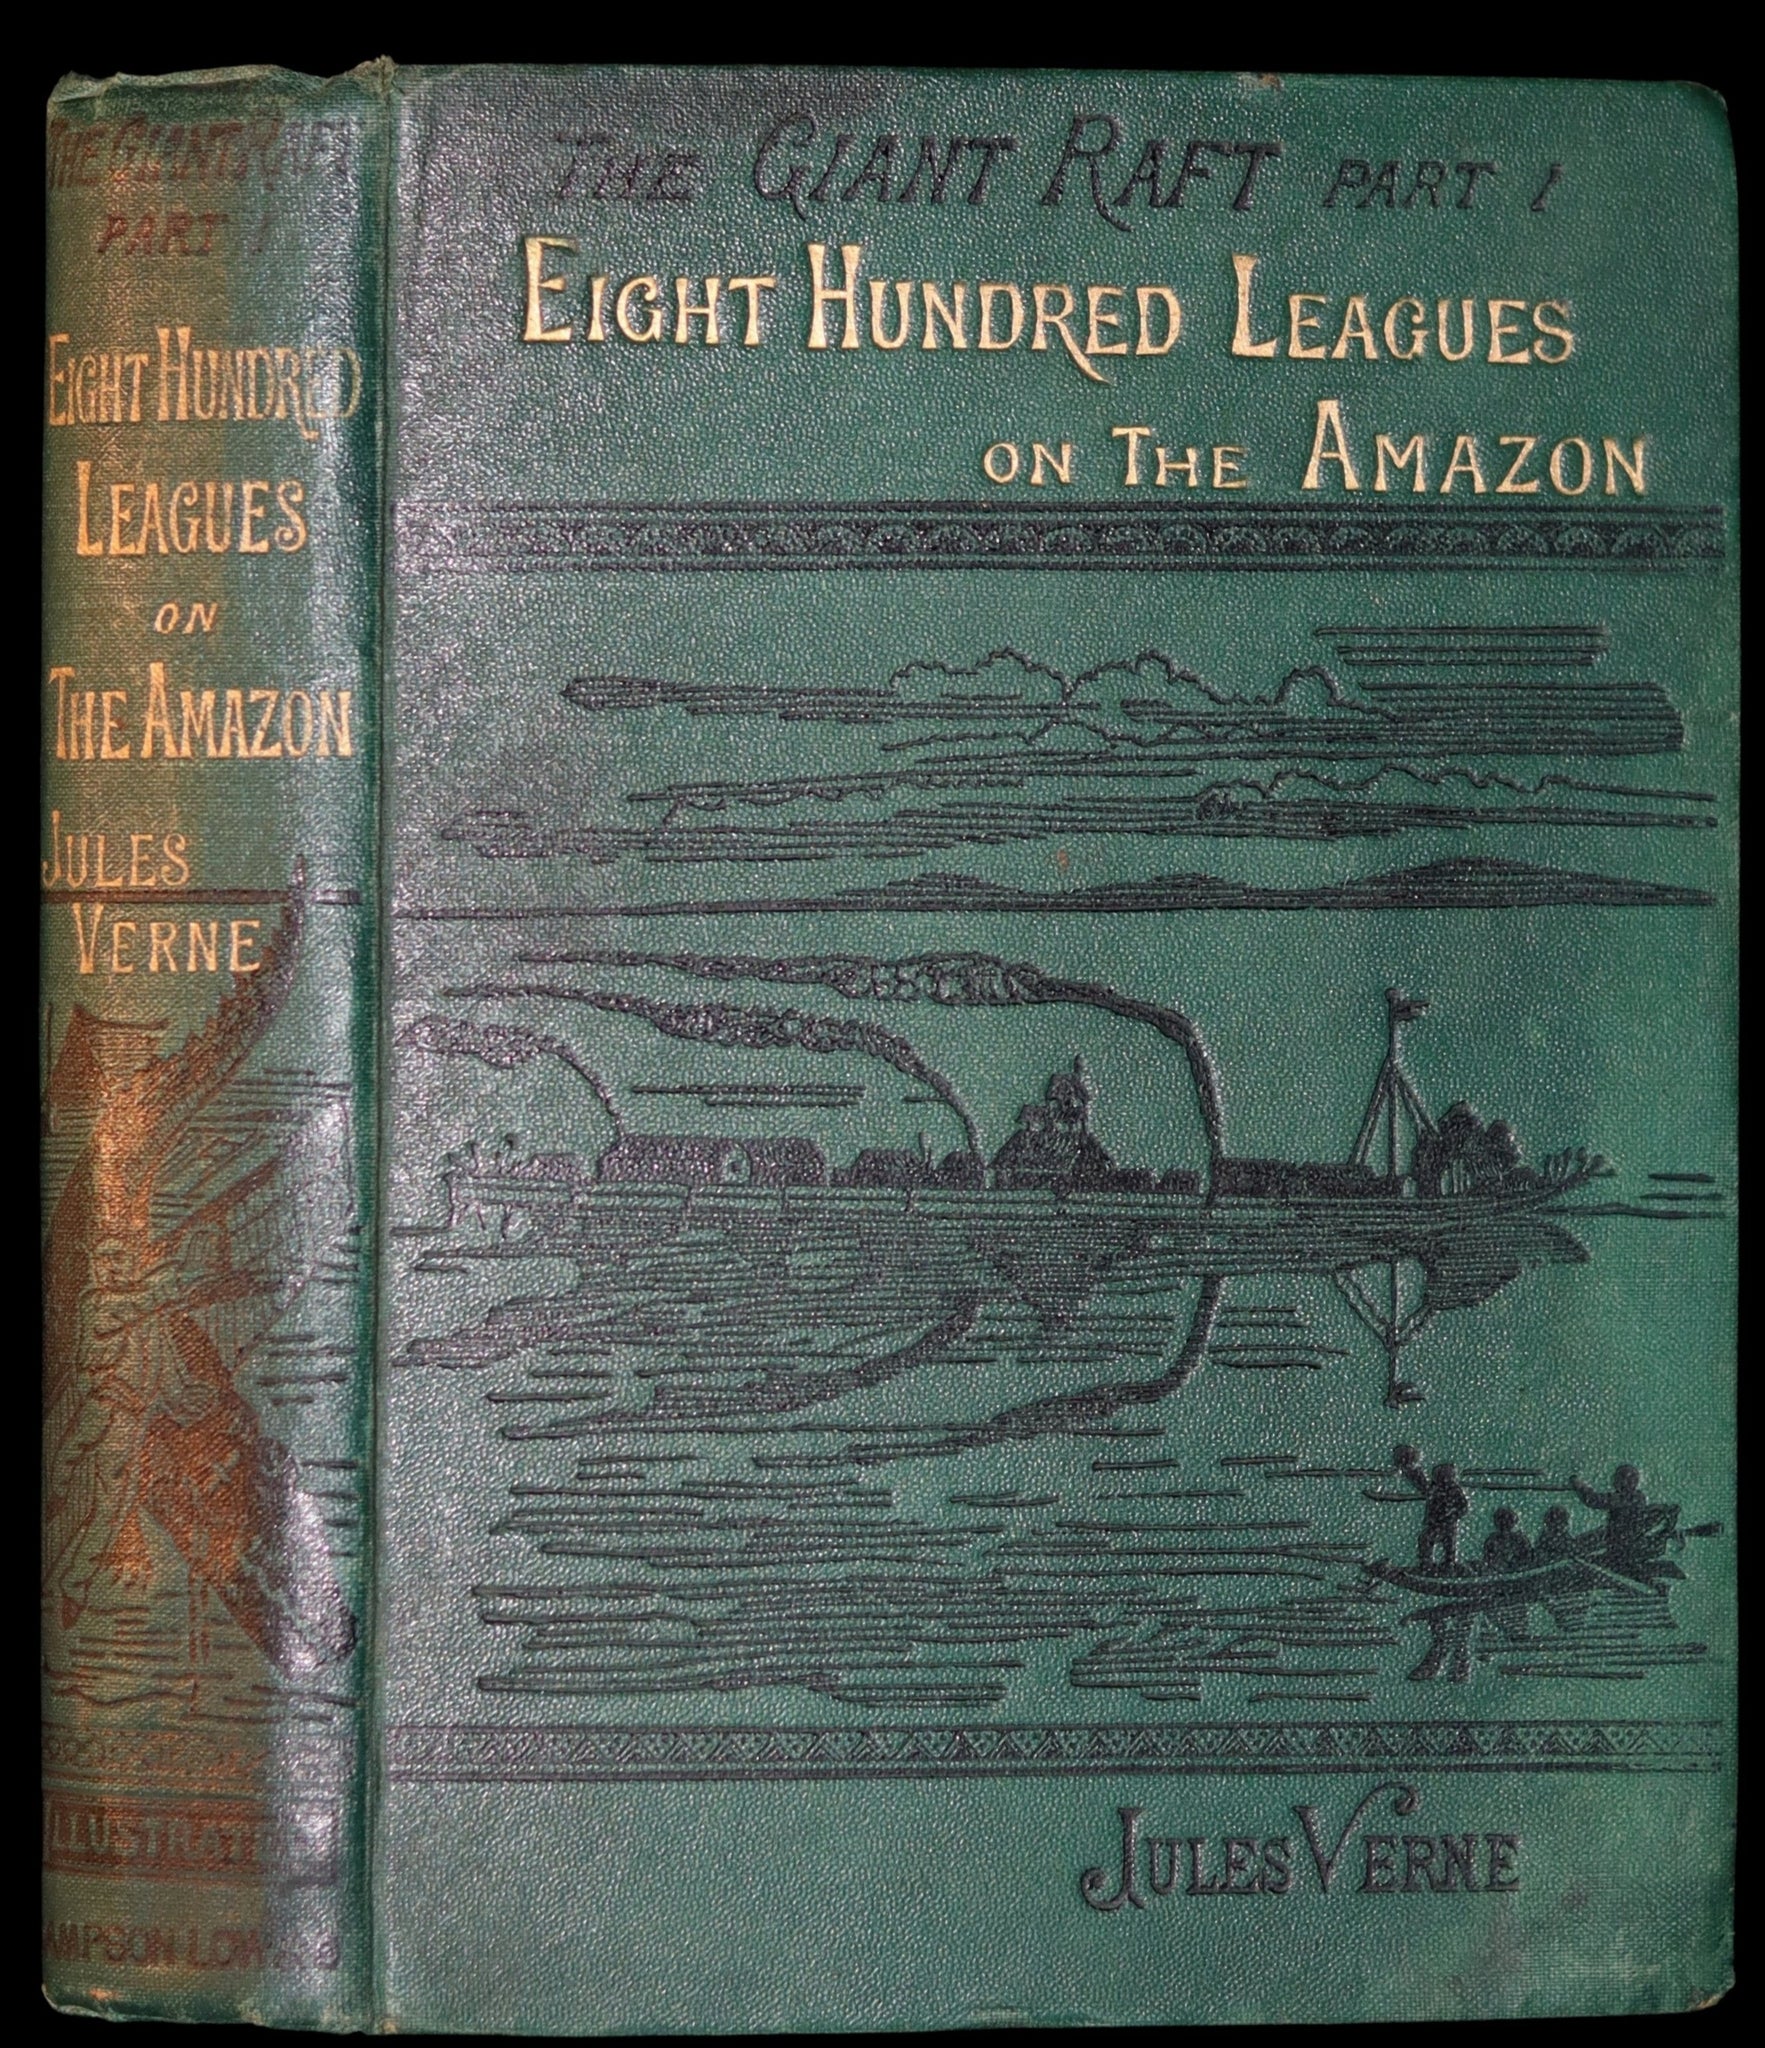 1889 Scarce Edition - Jules Verne - The Giant Raft: Eight Hundred Leagues on The Amazon